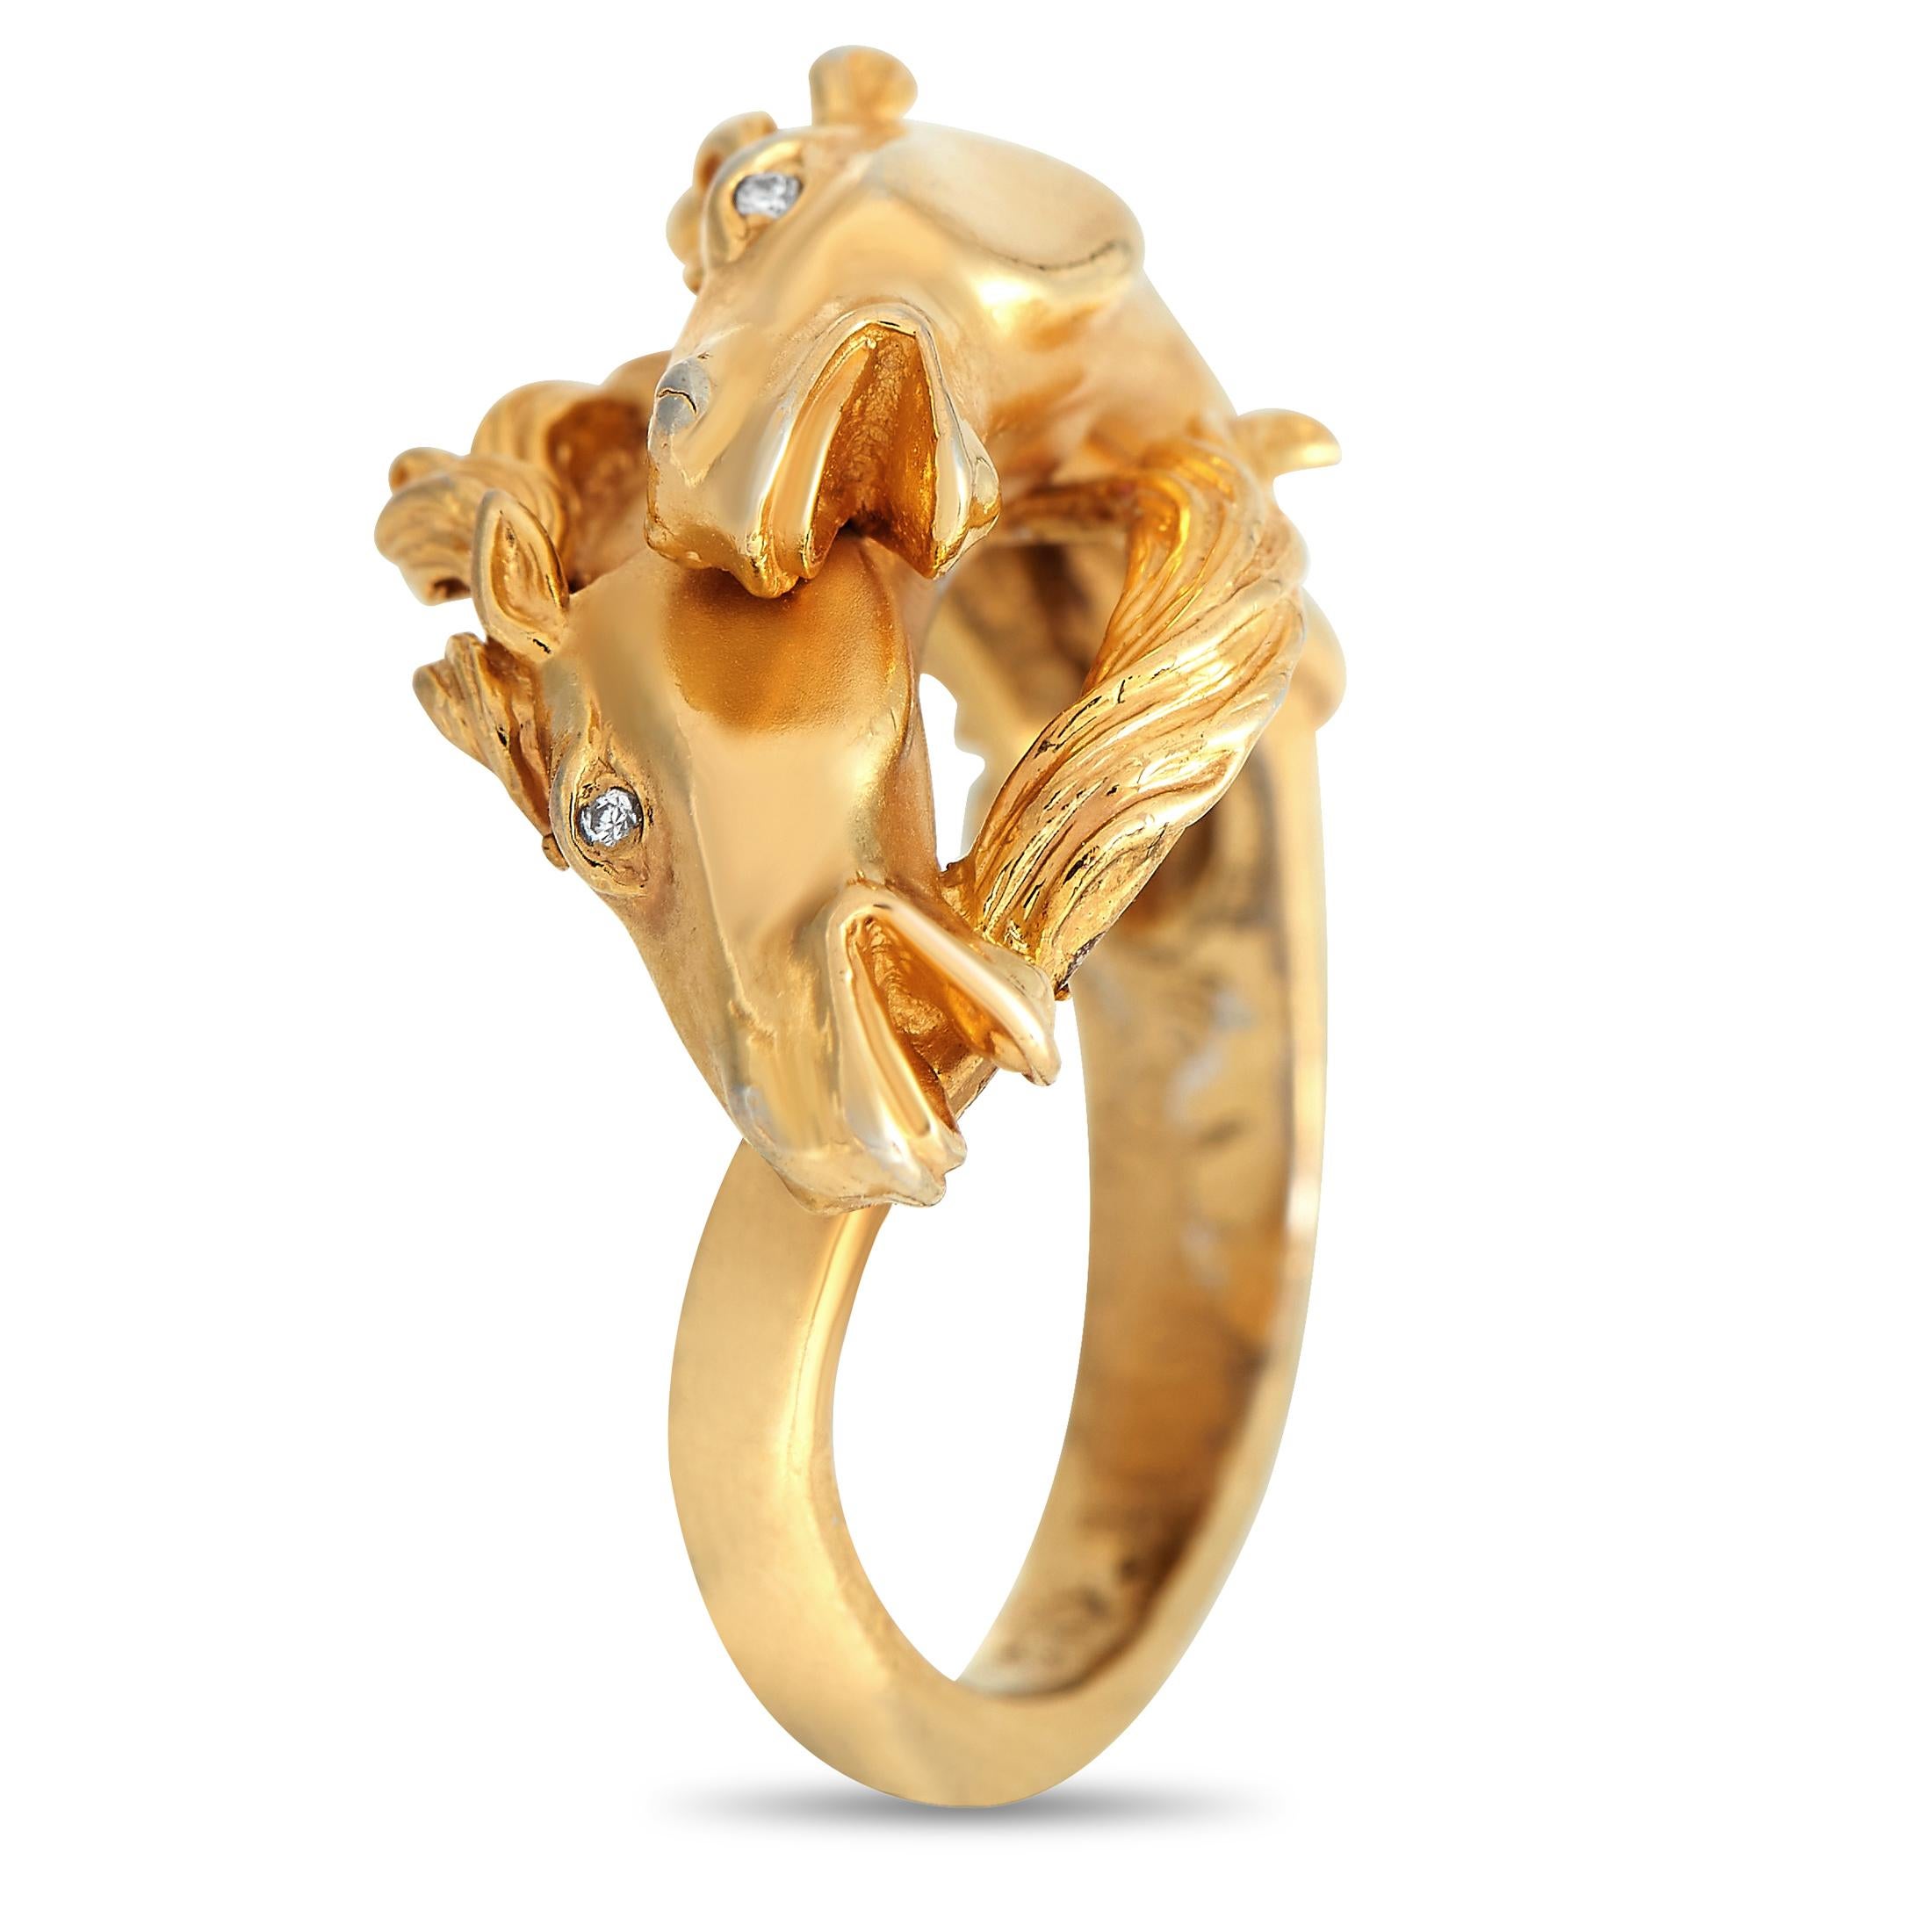 Do you think the horse is your spirit animal? Connect with the equine energy through this ring. This Carrera y Carrera ring features a satin-finished band with two sculpted horse heads as an accent. Diamond eyes and textured mane and tail add extra